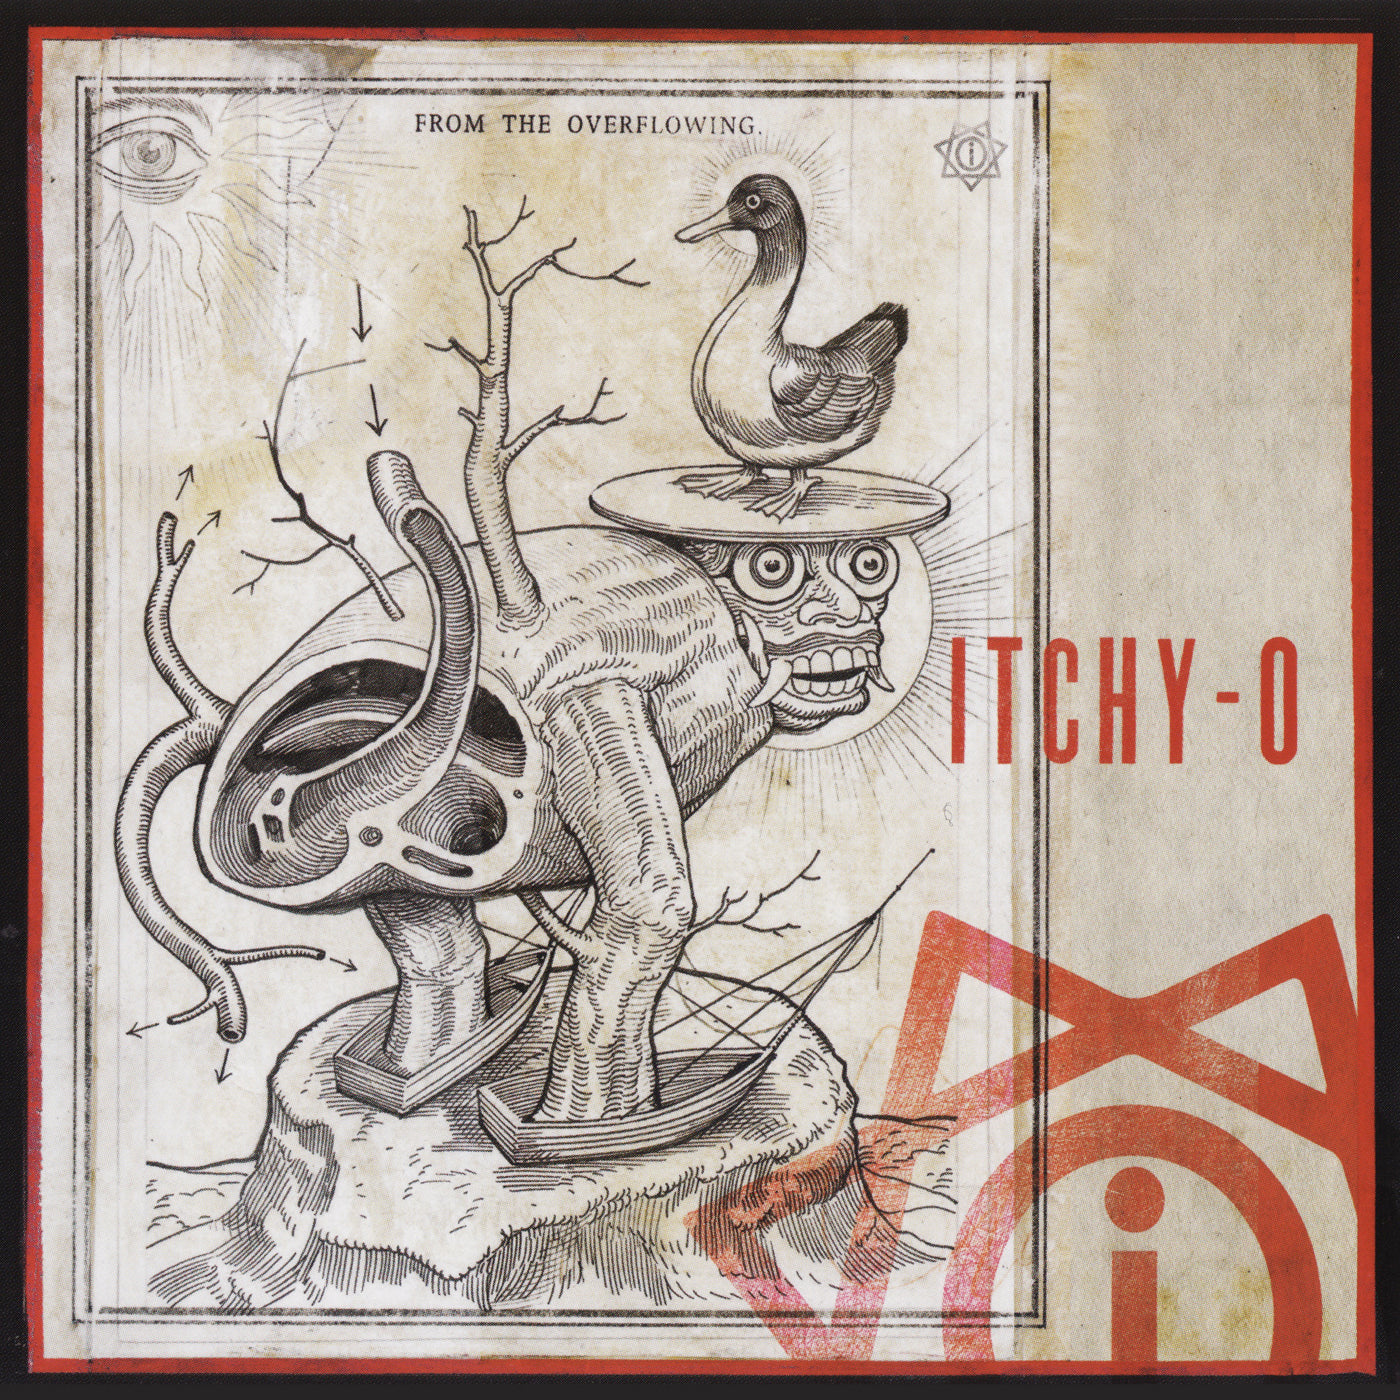 v492 - Itchy-O - "From The Overflowing"